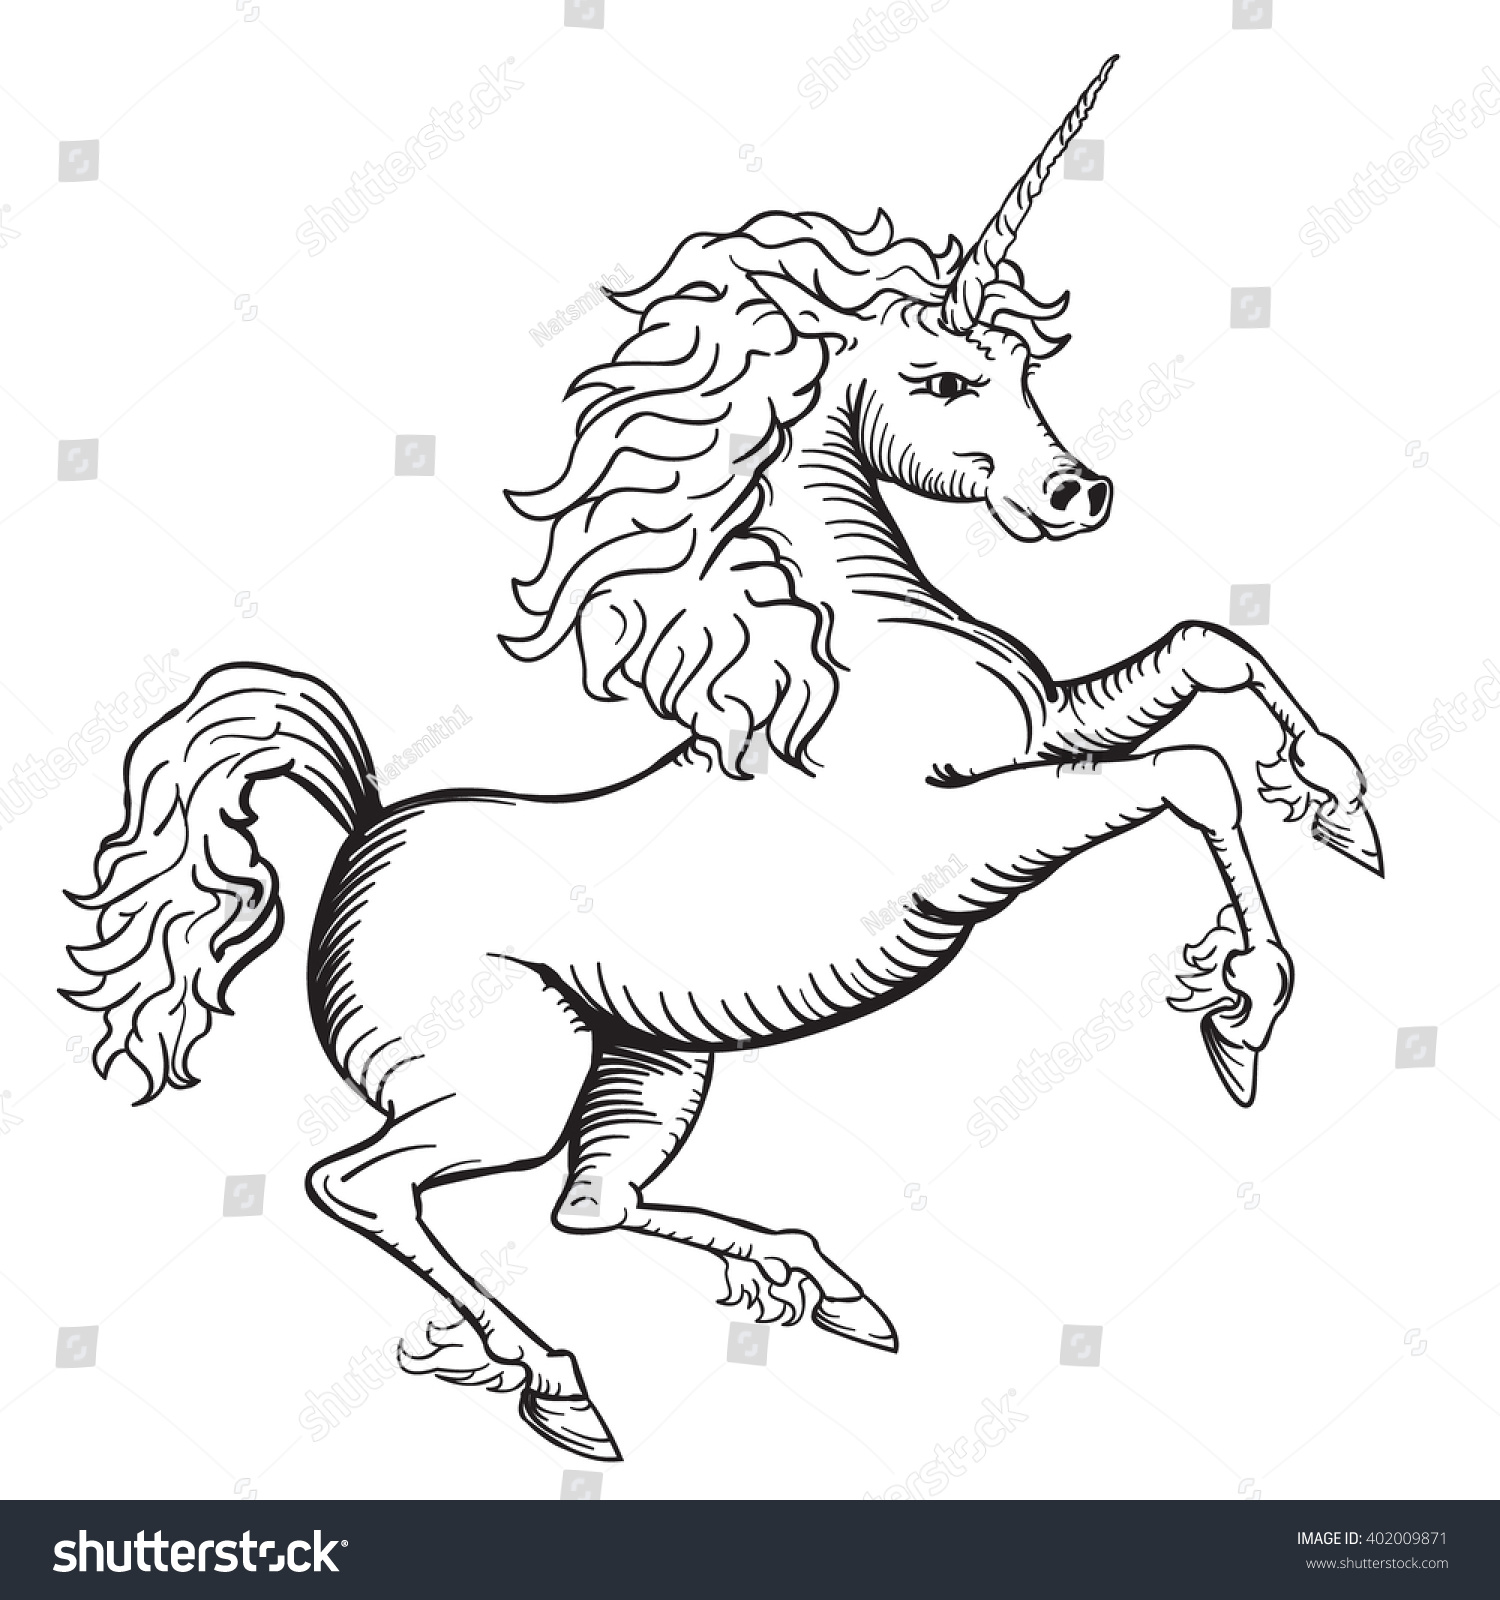 Easy Unicorn Drawing Black And White